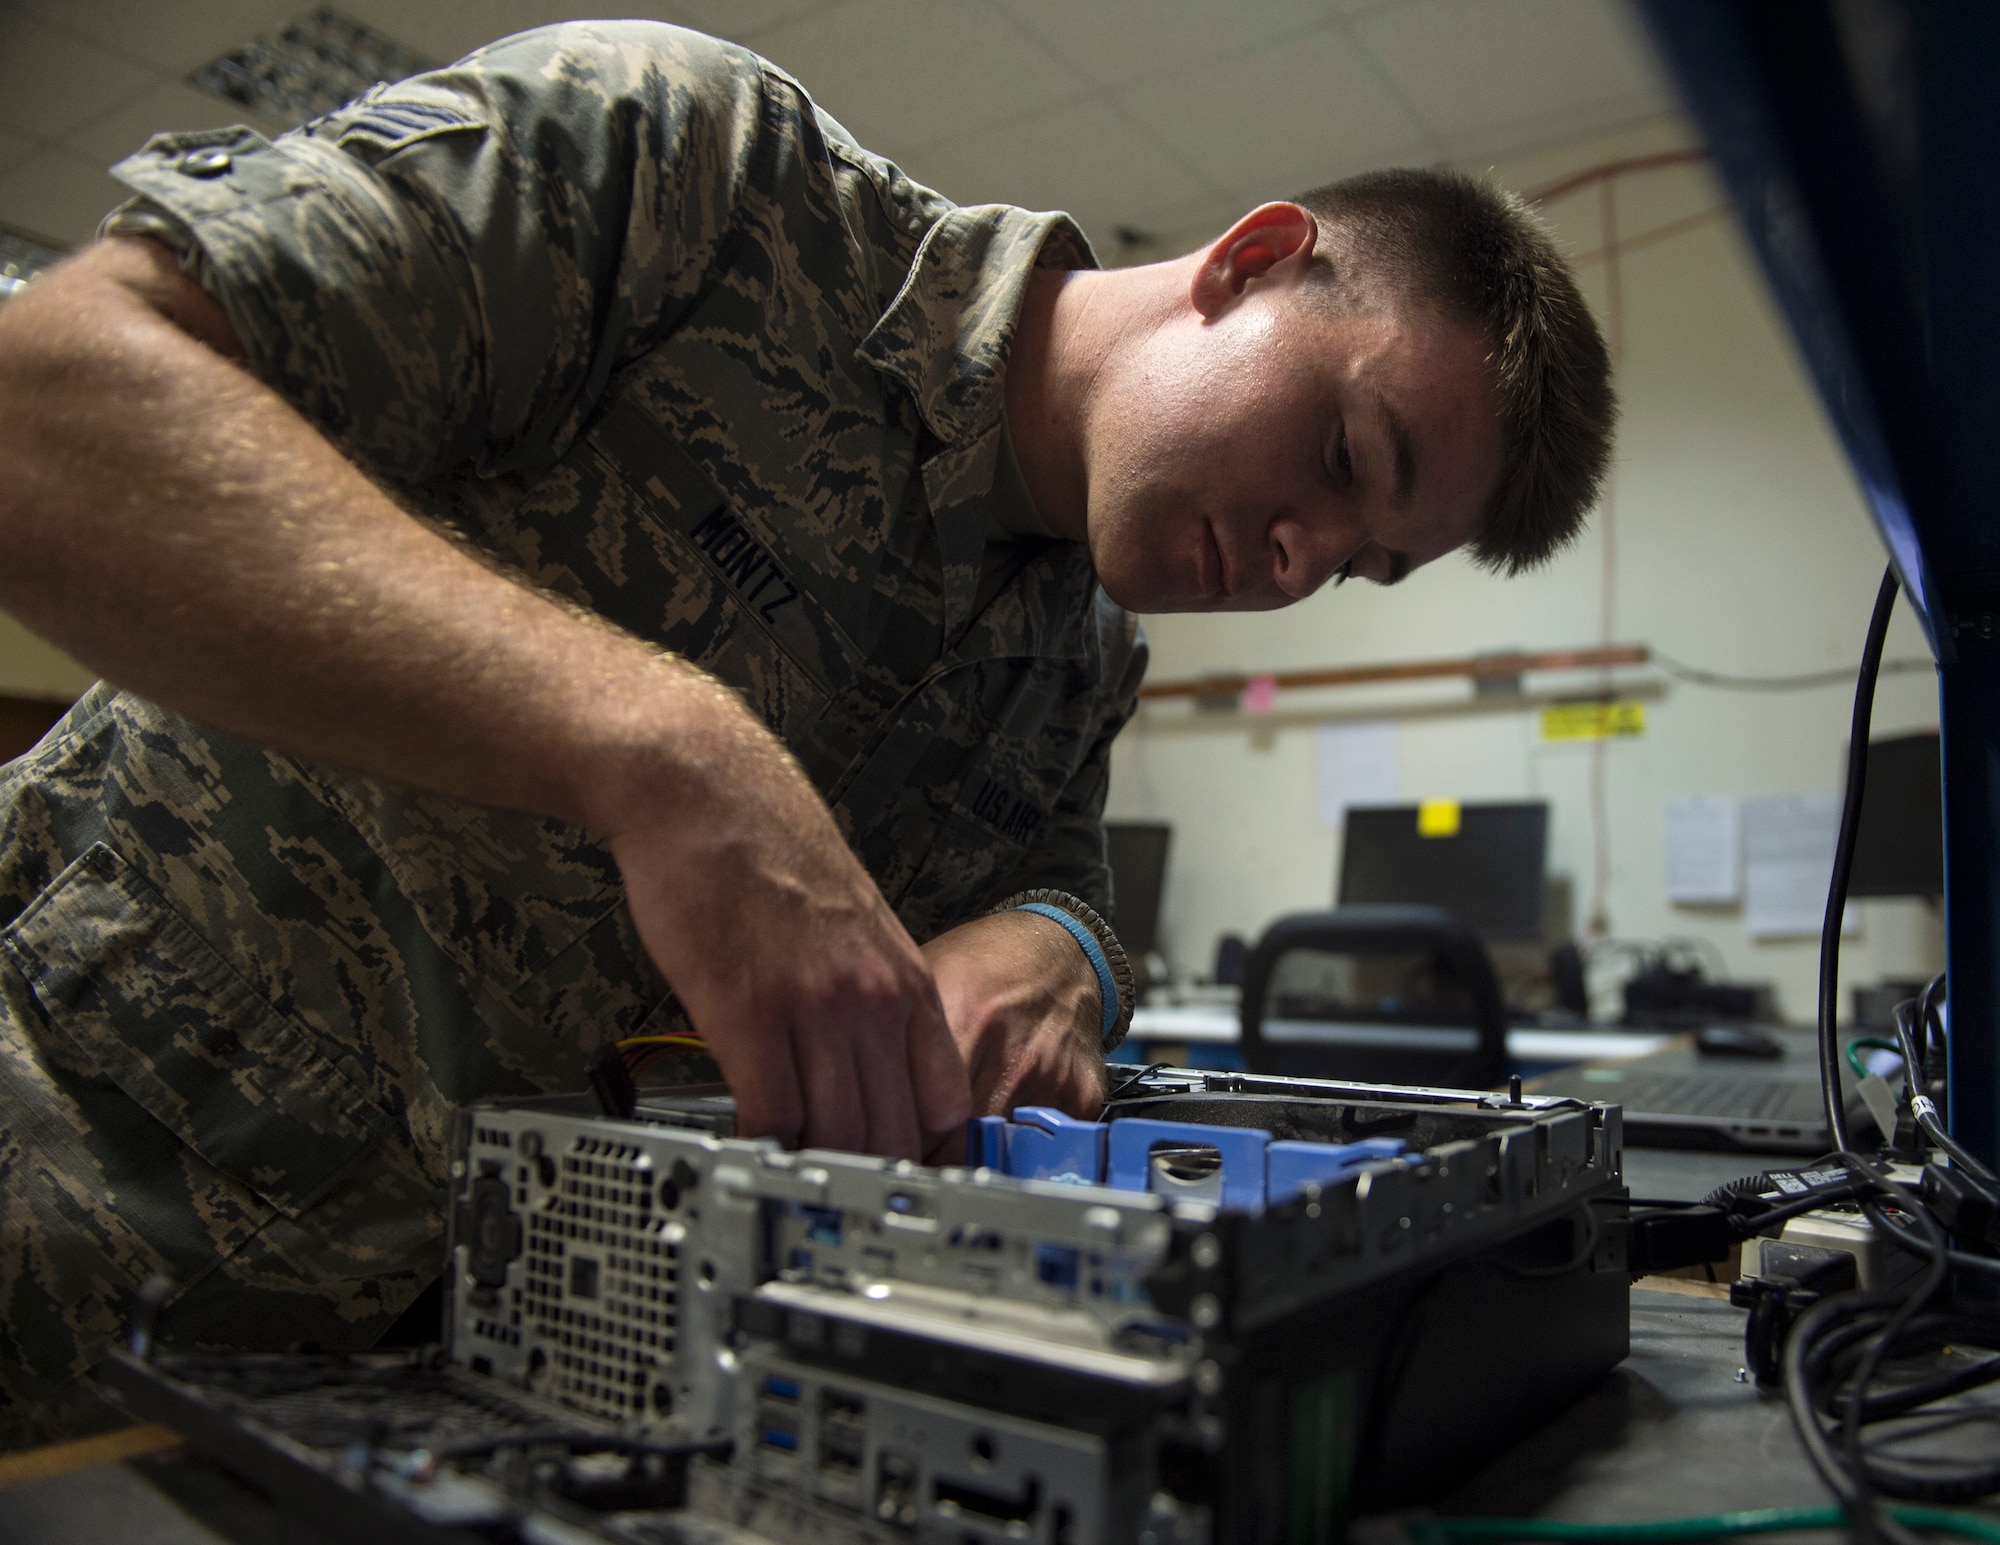 U.S. Air Force Senior Airman Andrew Montz, a cyber transport technician with the 379th Expeditionary Communication Squadron, repairs a desktop computer at Al Udeid Air Base, Qatar, July 14, 2017. Montz is responsible for installing programs, troubleshooting and repairing computer problems, and ensuring that all of the hardware and software systems are functional. (U.S. Air Force photo by Tech. Sgt. Amy M. Lovgren)